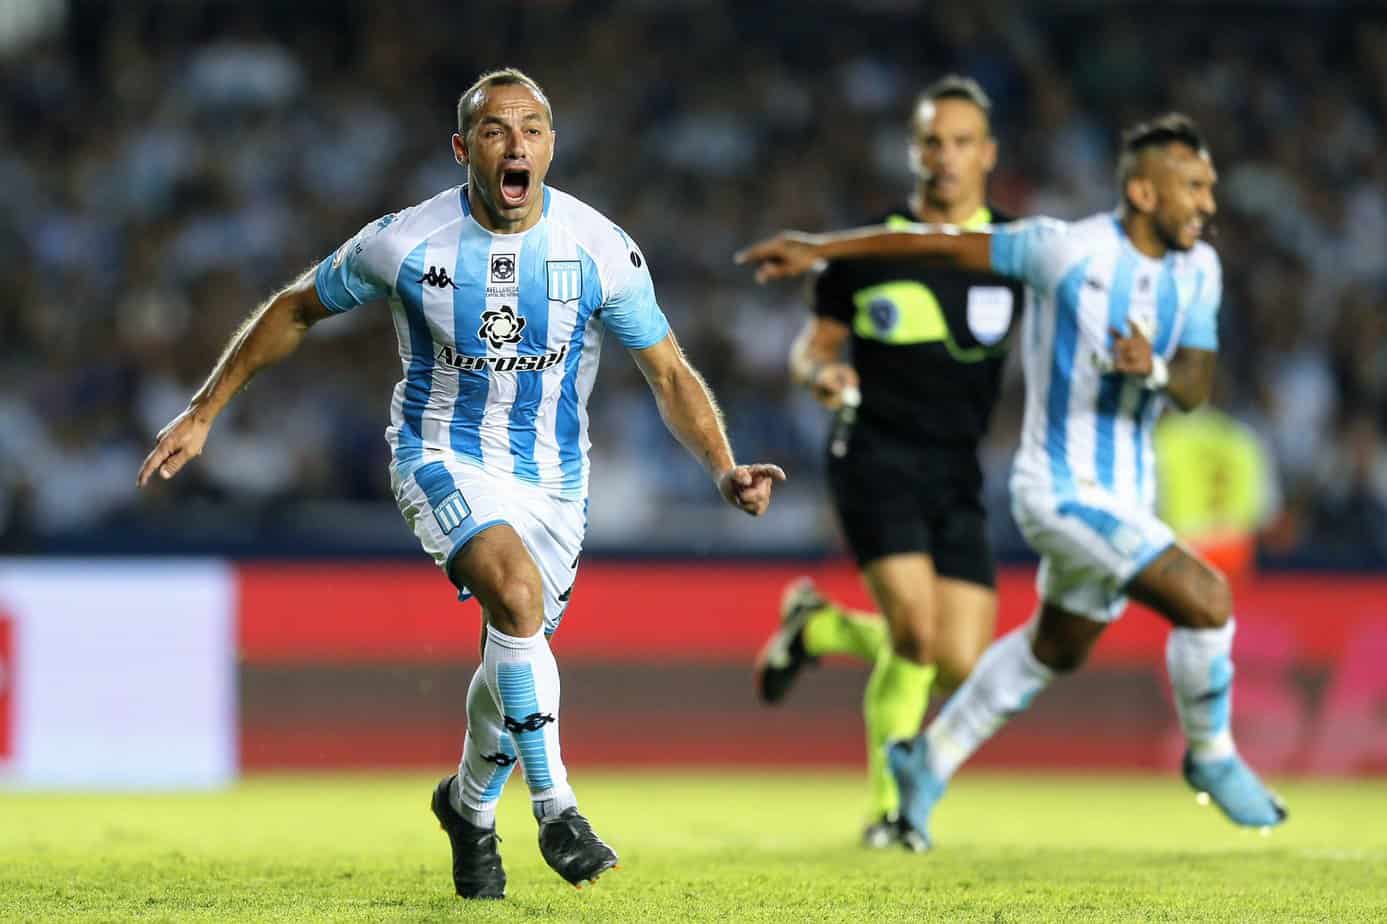 Central Cordoba vs. Racing – Betting Odds and Free Pick